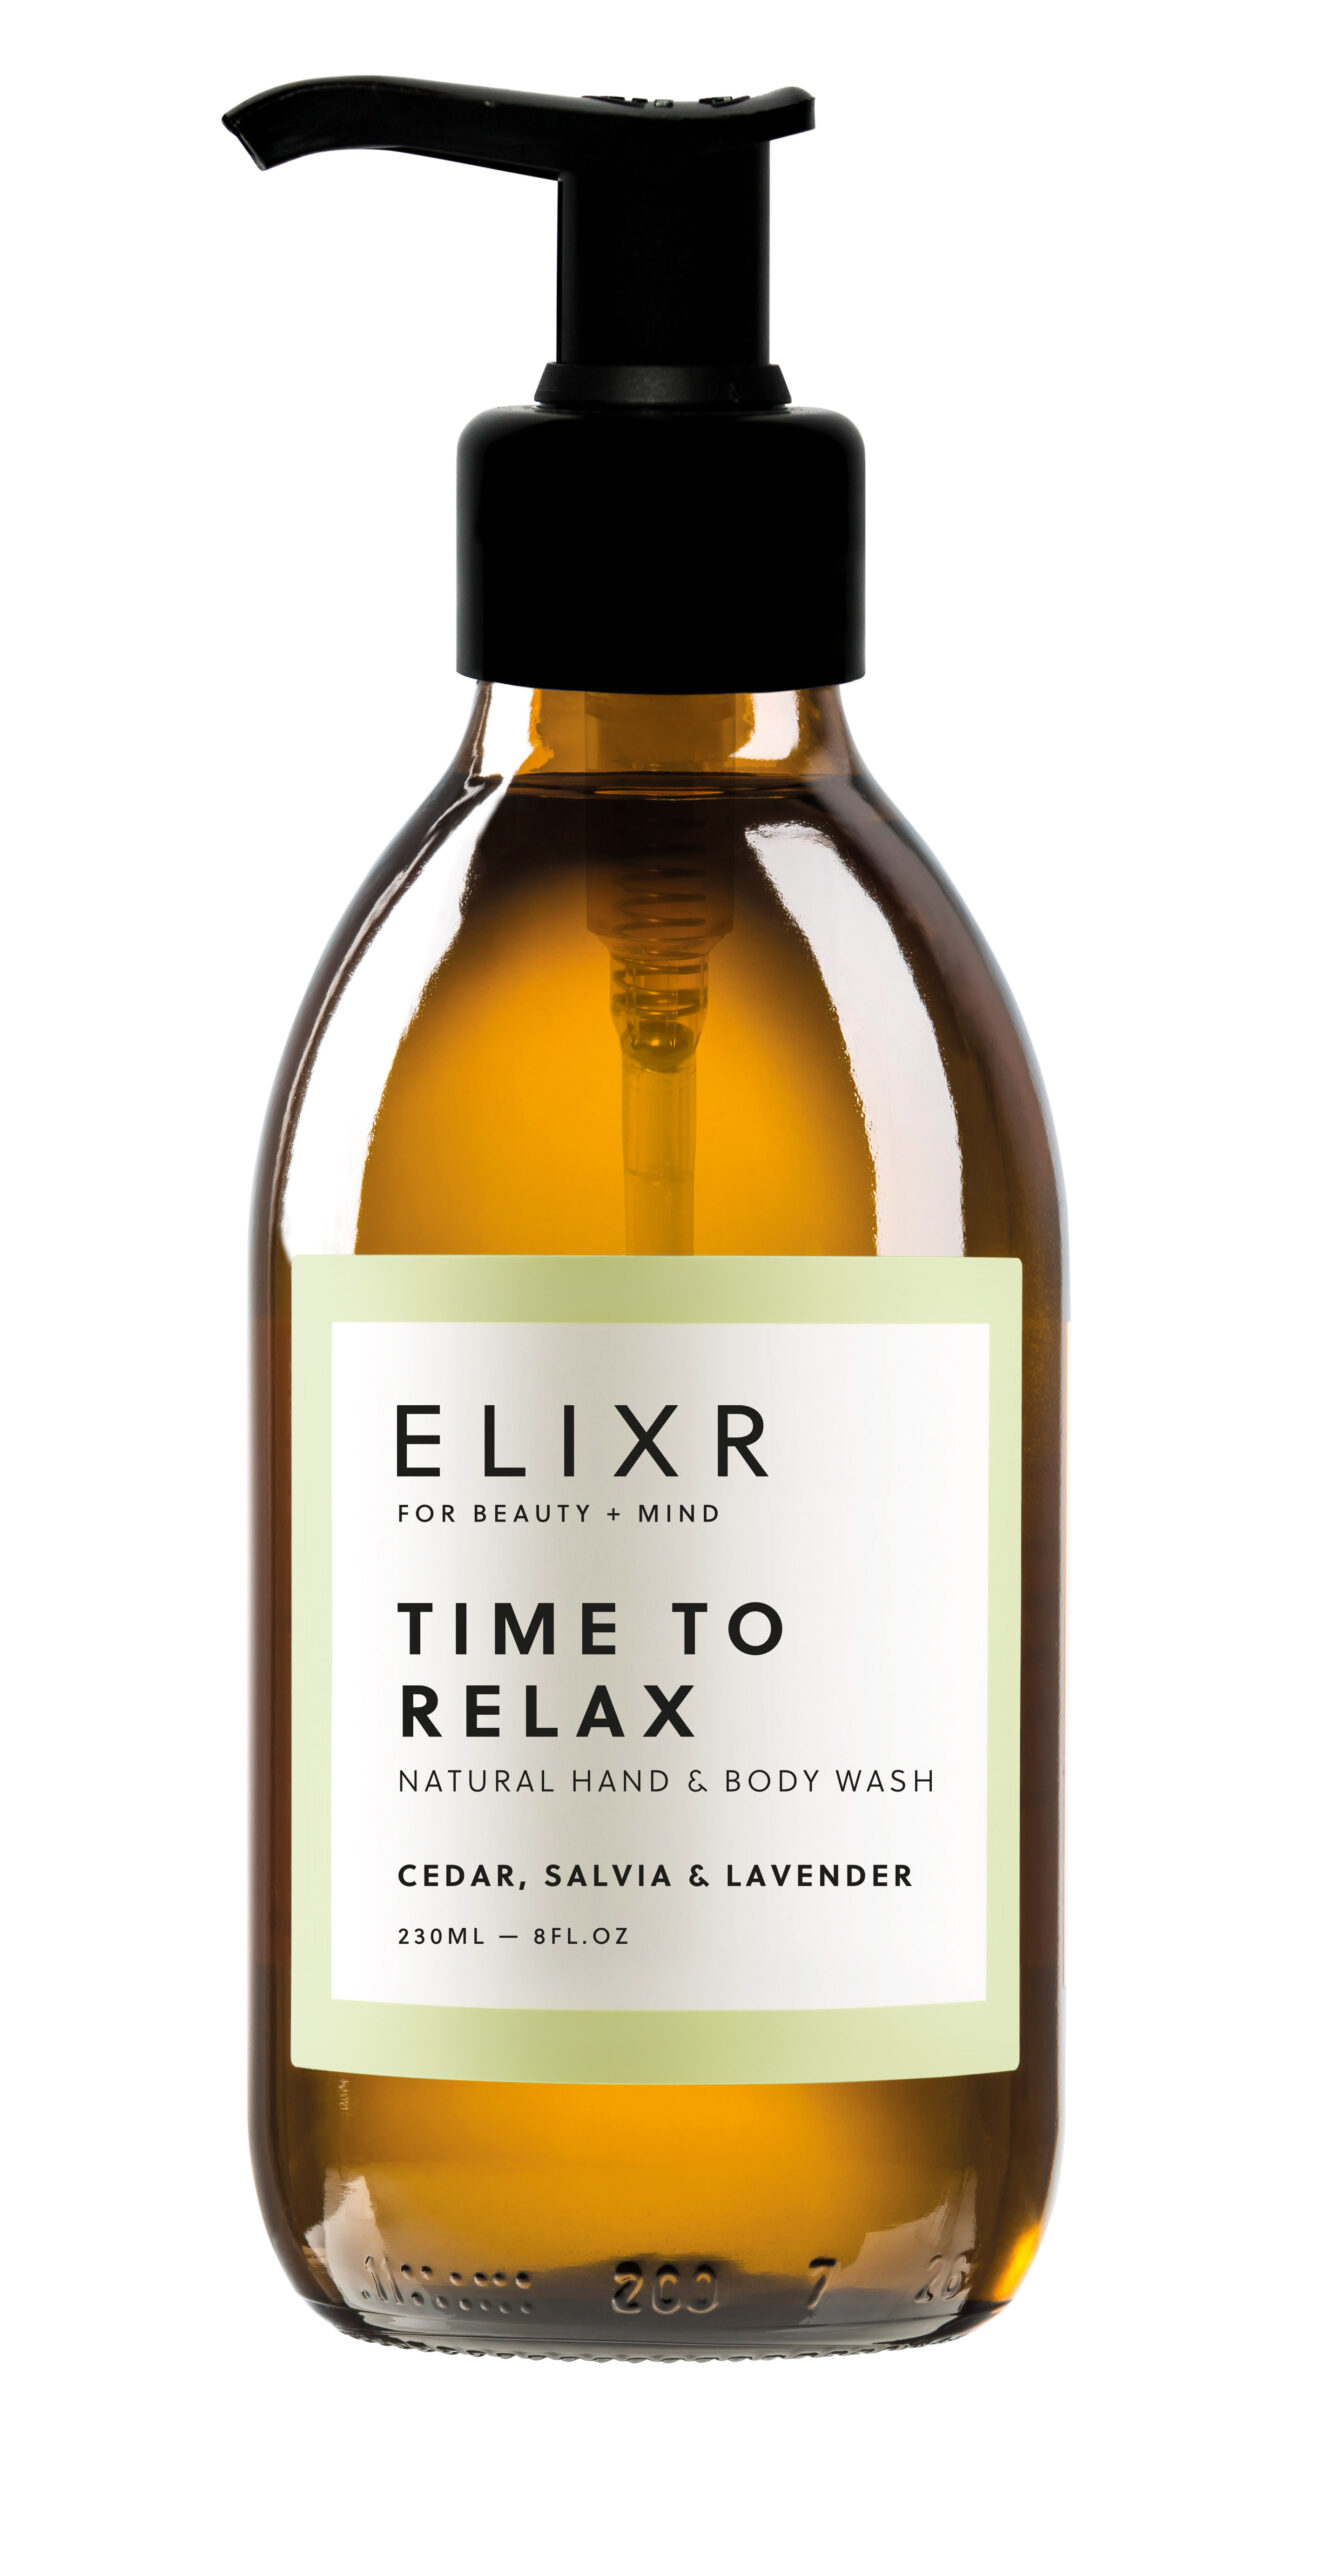 Elixr TIME TO RELAX Hand & Body Wash 230ml